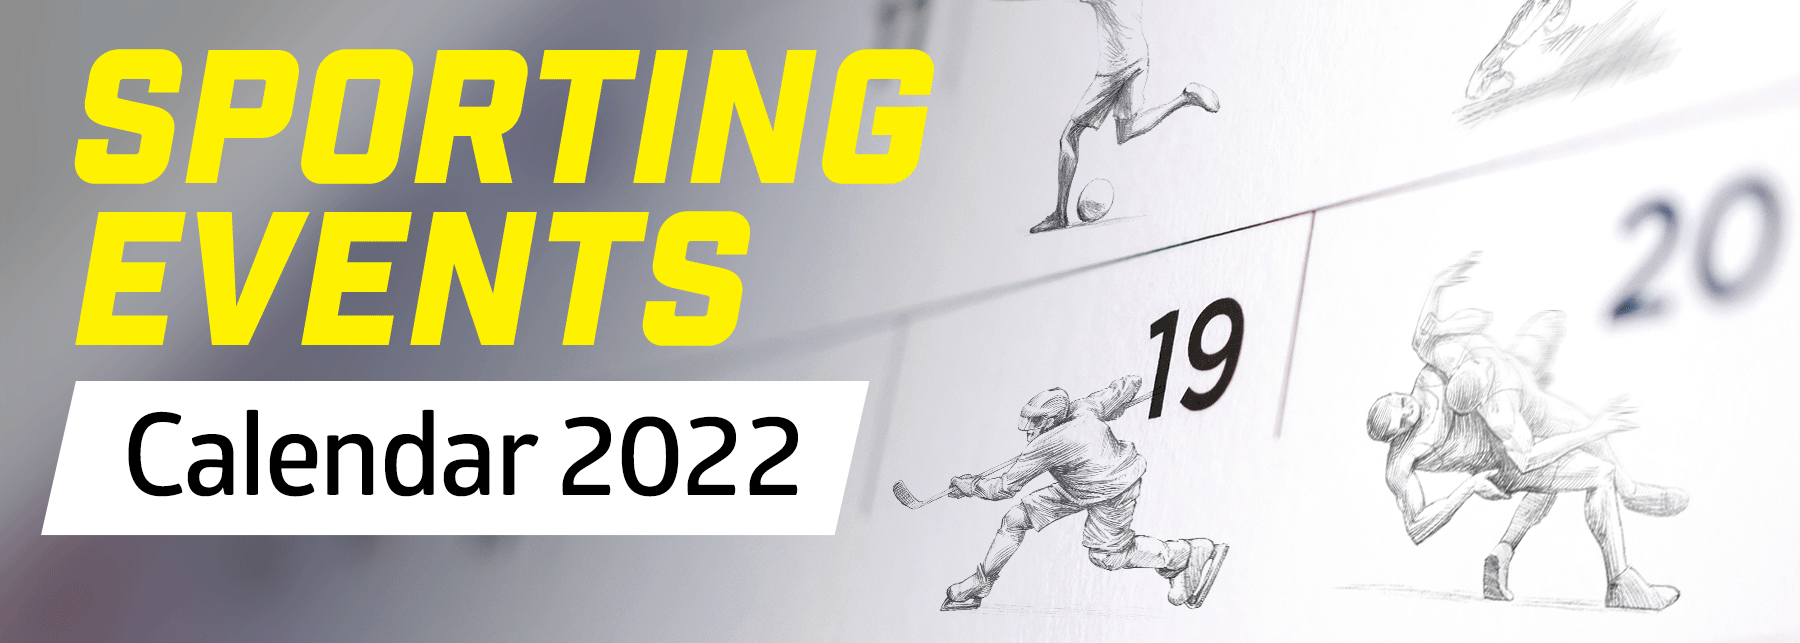 sporting events 2022